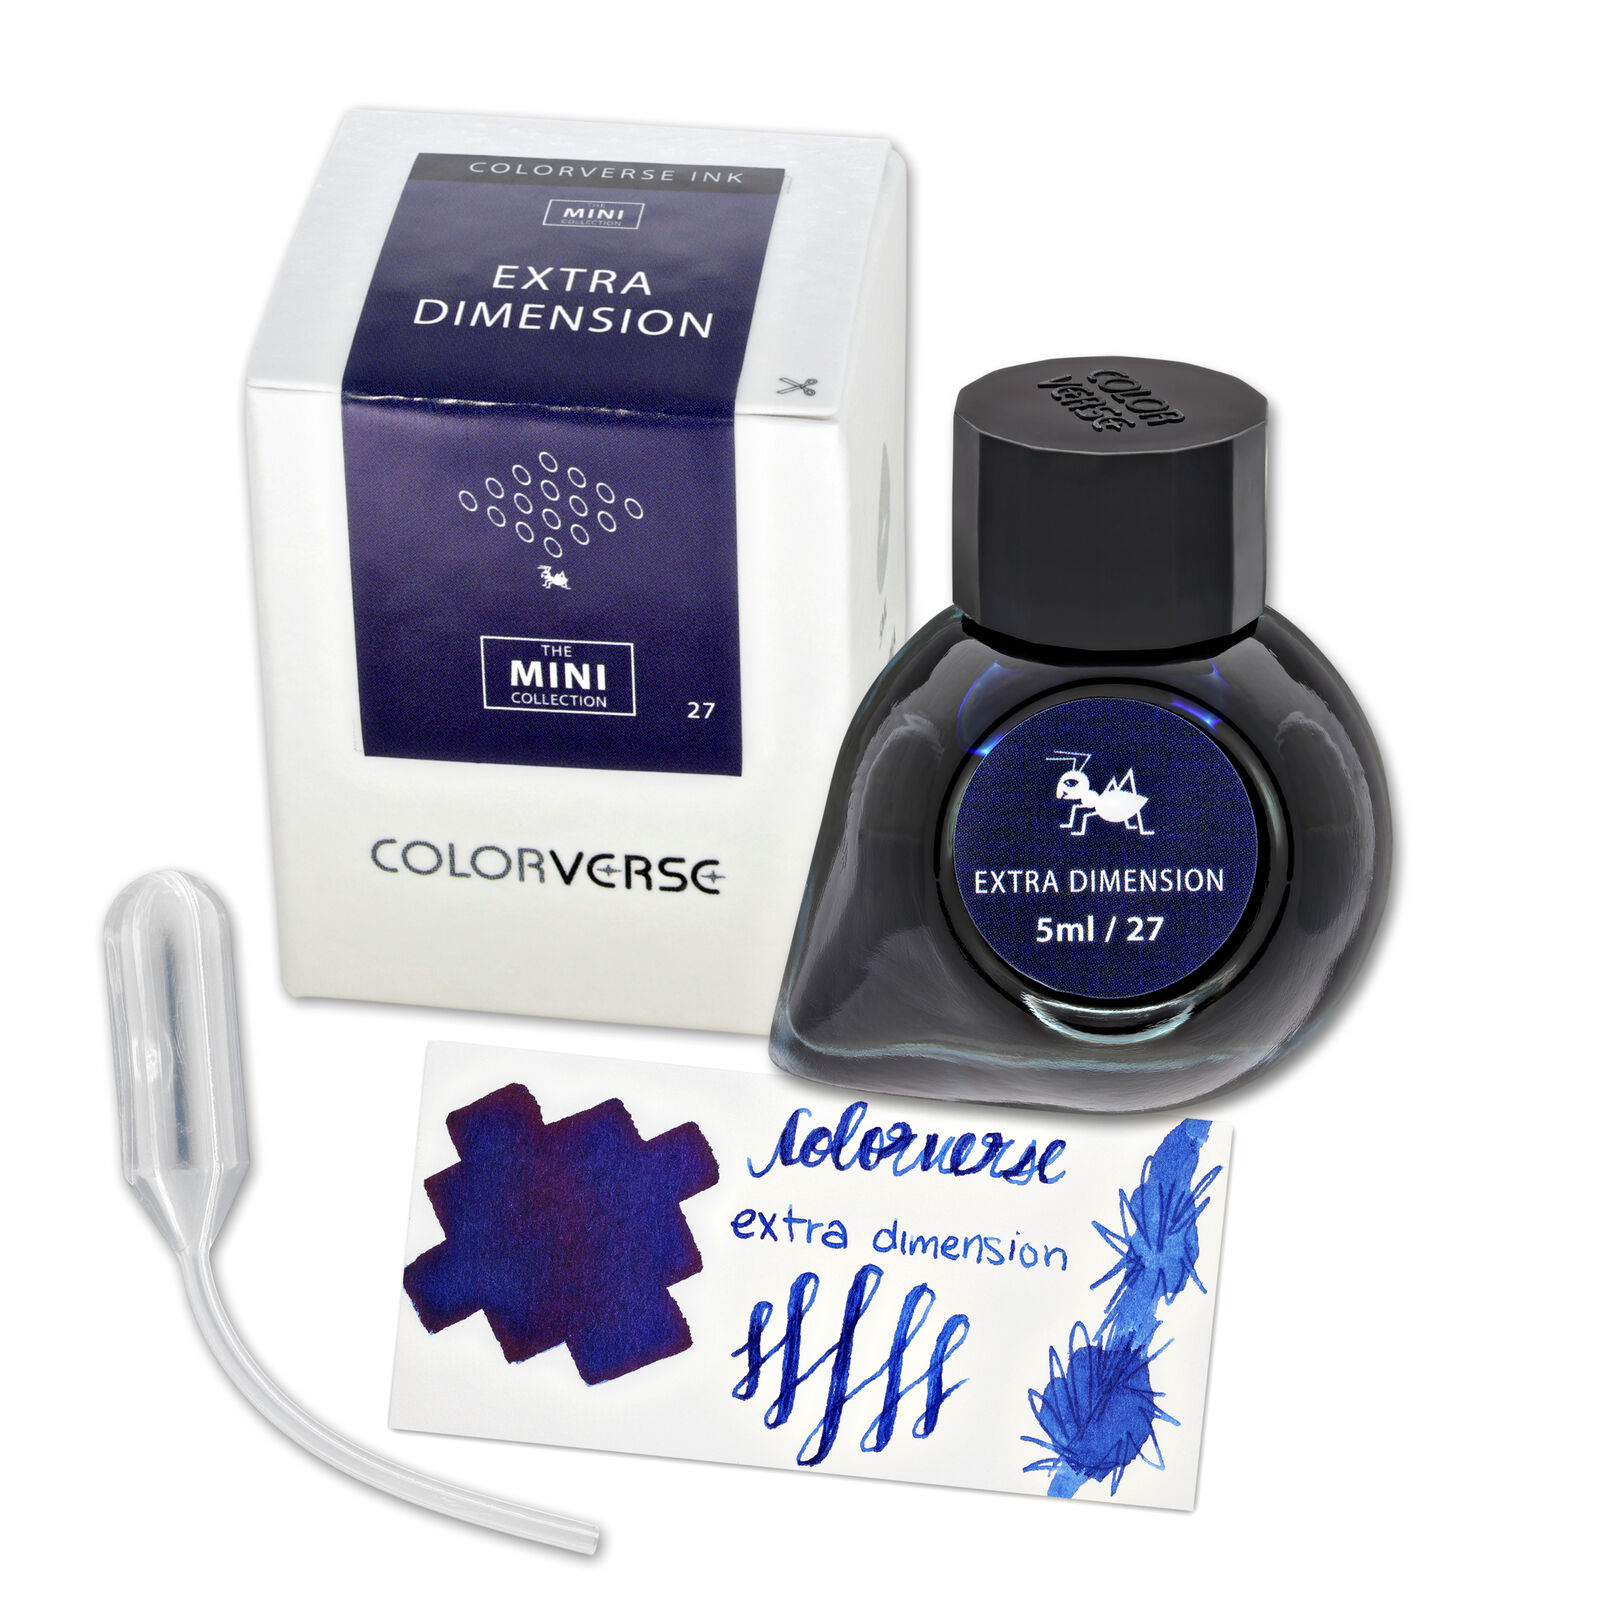 Colorverse Multiverse Mini Bottled Ink in Extra Dimension - 5mL NEW in Box